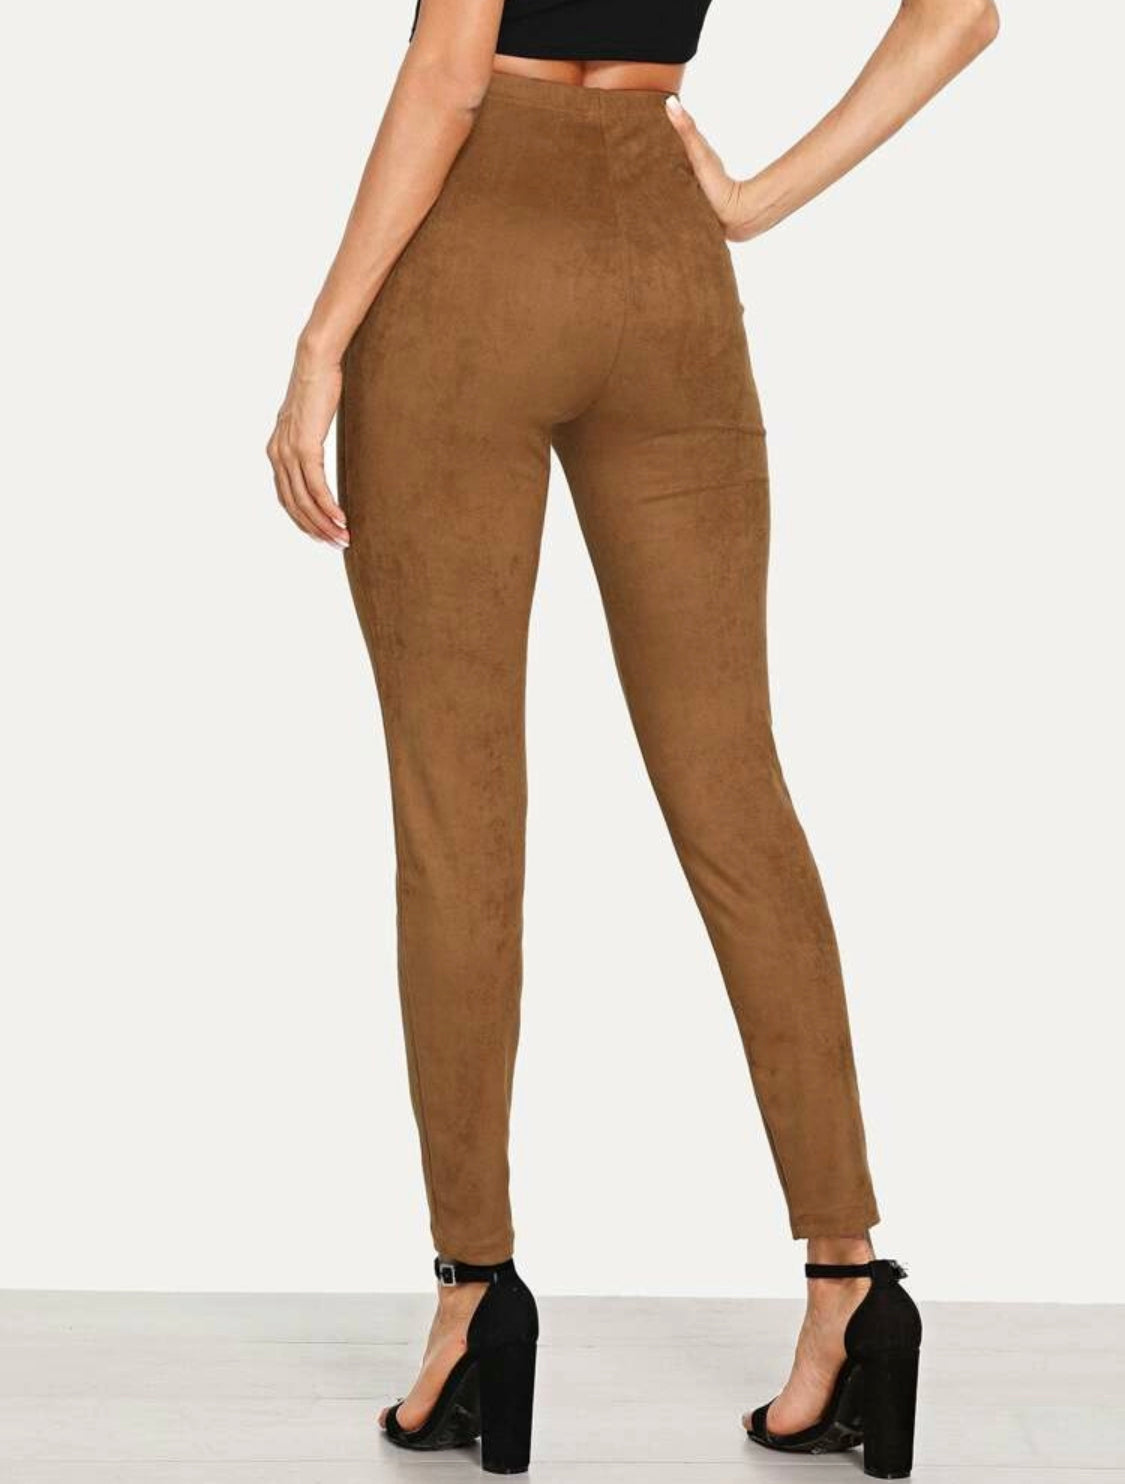 Solid Suede Leggings - GLAD AND GLAM